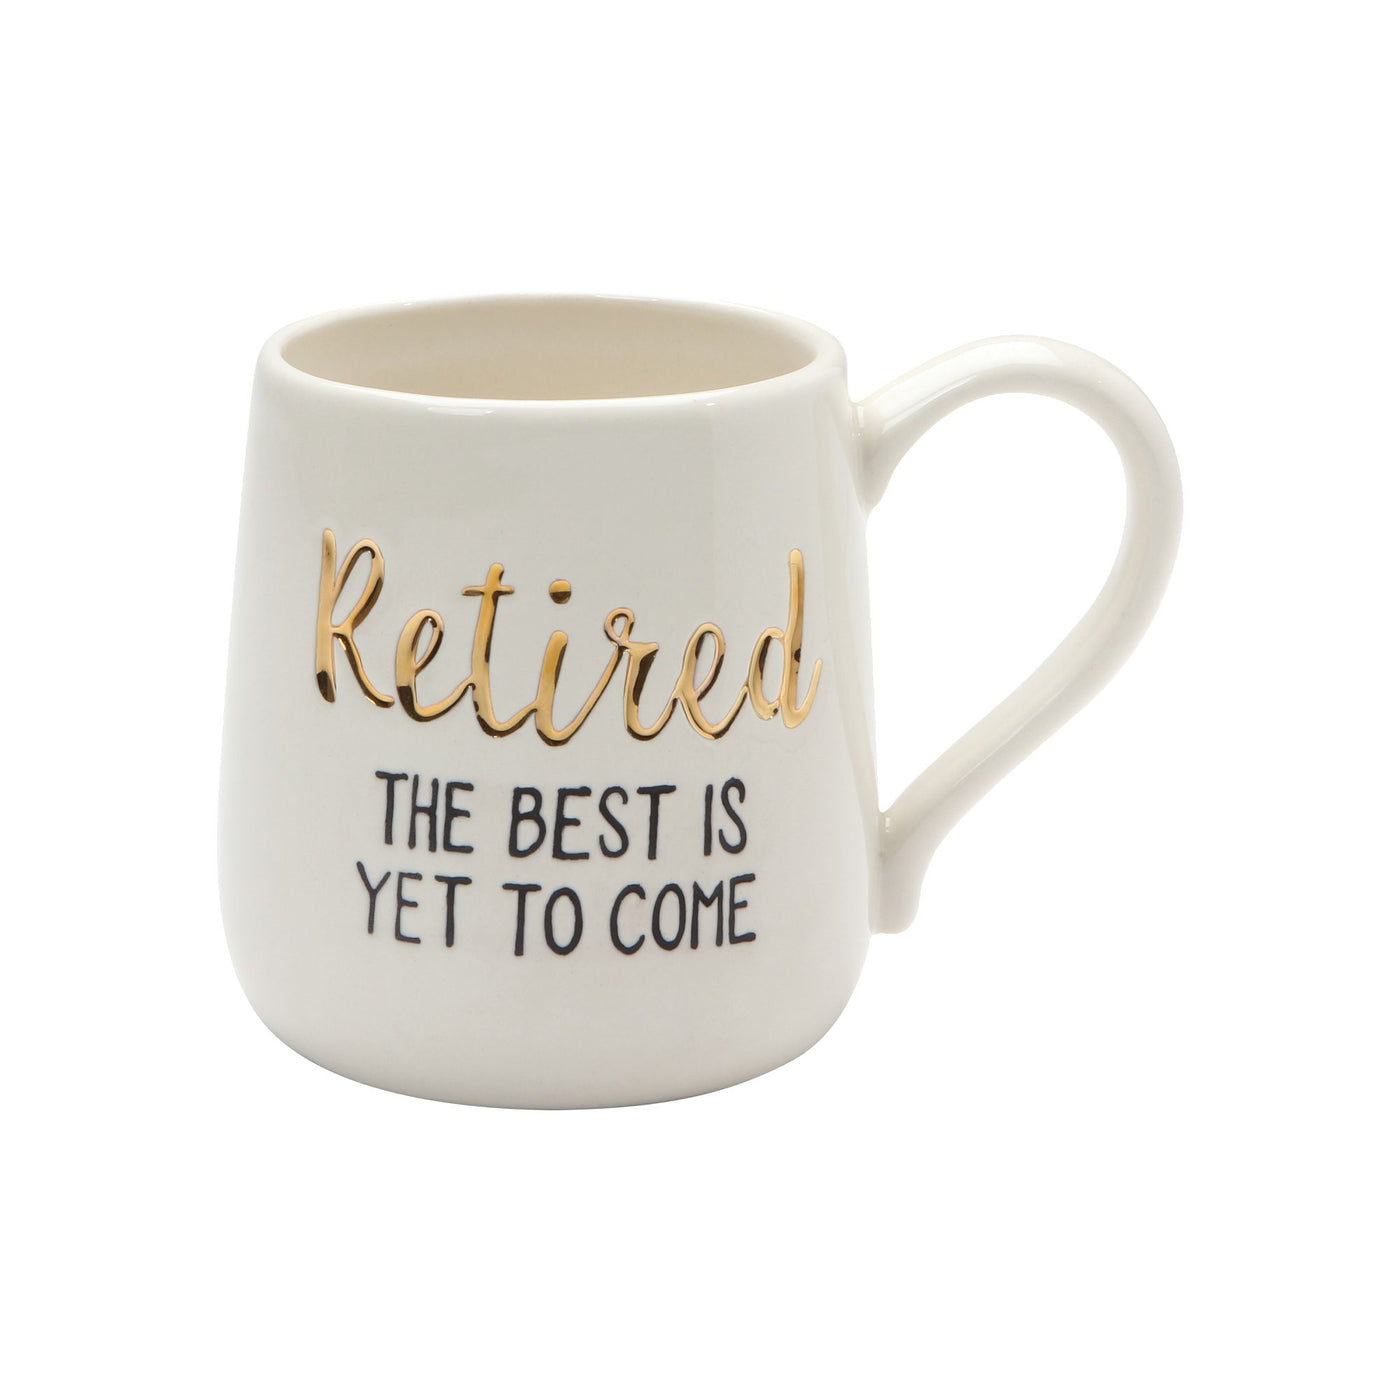 Retired - The Best is Yet to Come 16 Ounce Mug